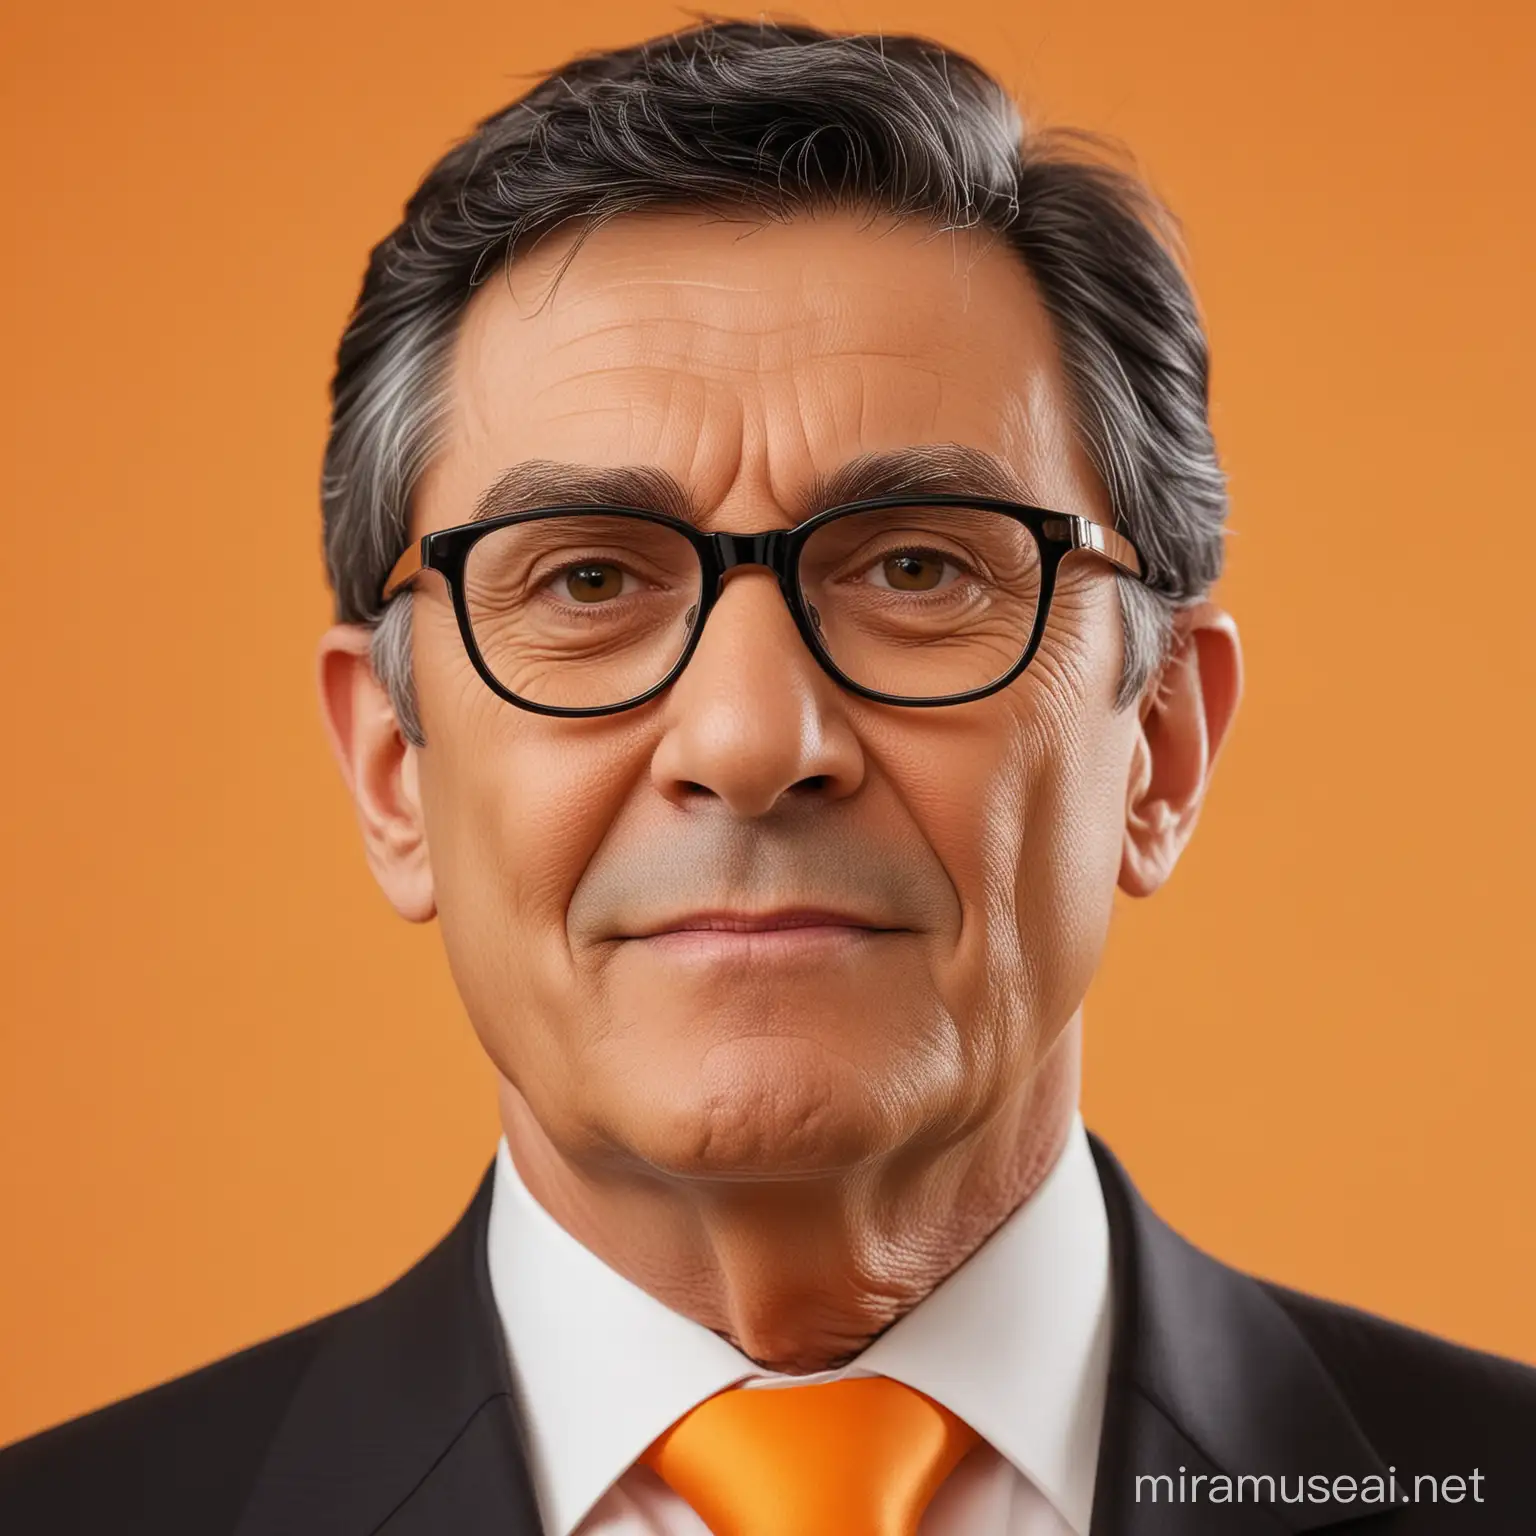 Respected 61YearOld Politician President with Black Hair and Thin Glasses on Vibrant Orange Background